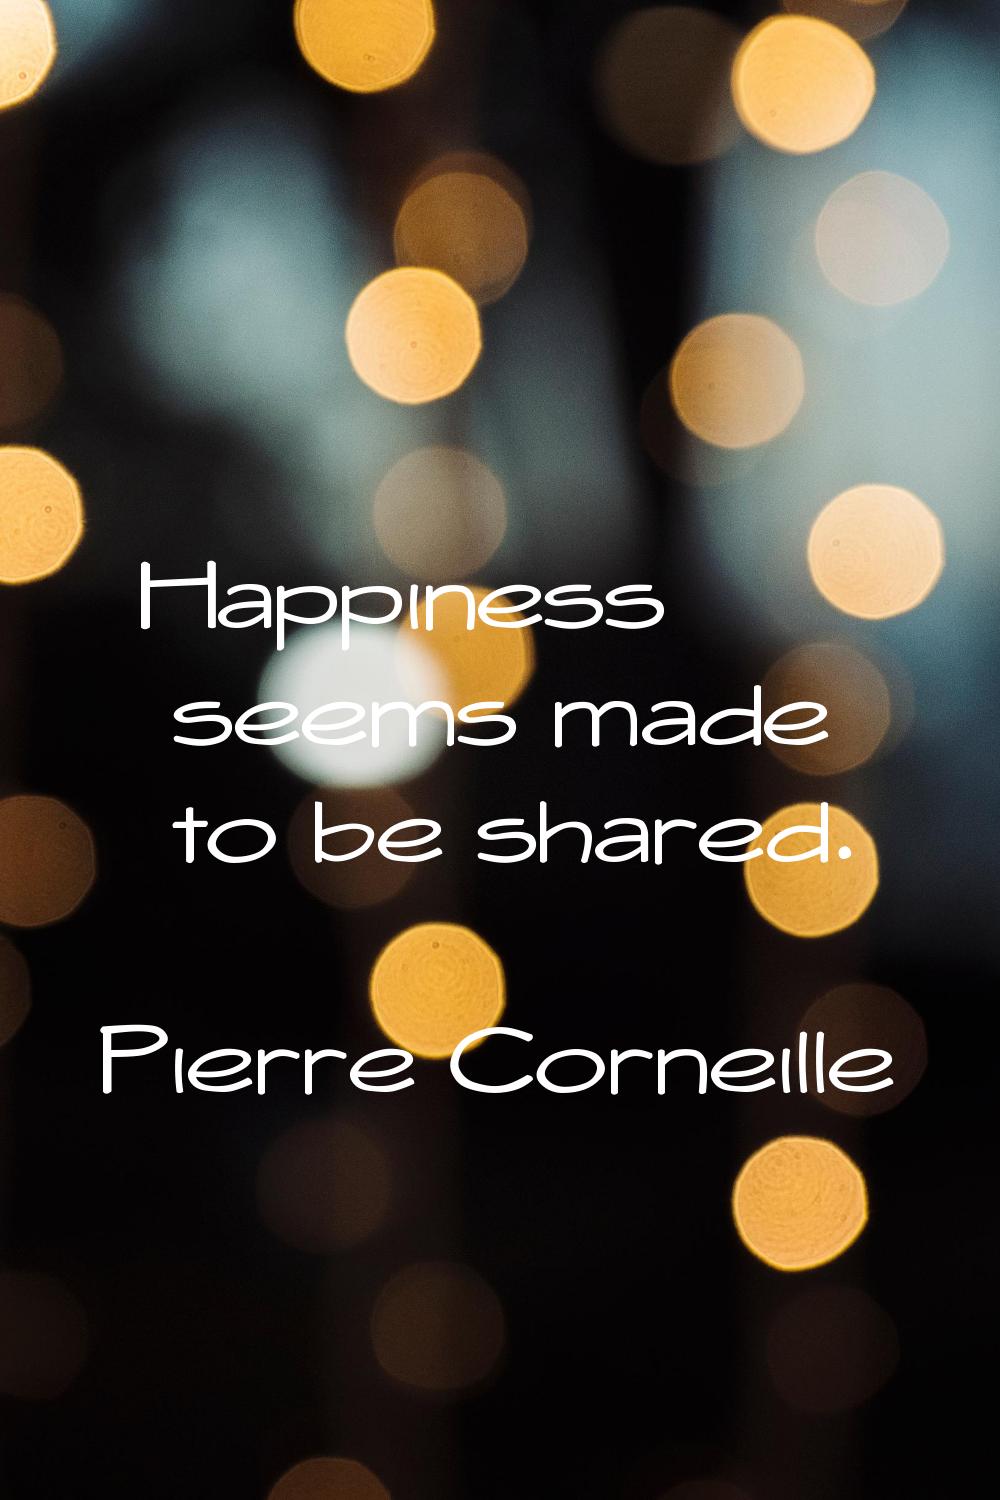 Happiness seems made to be shared.